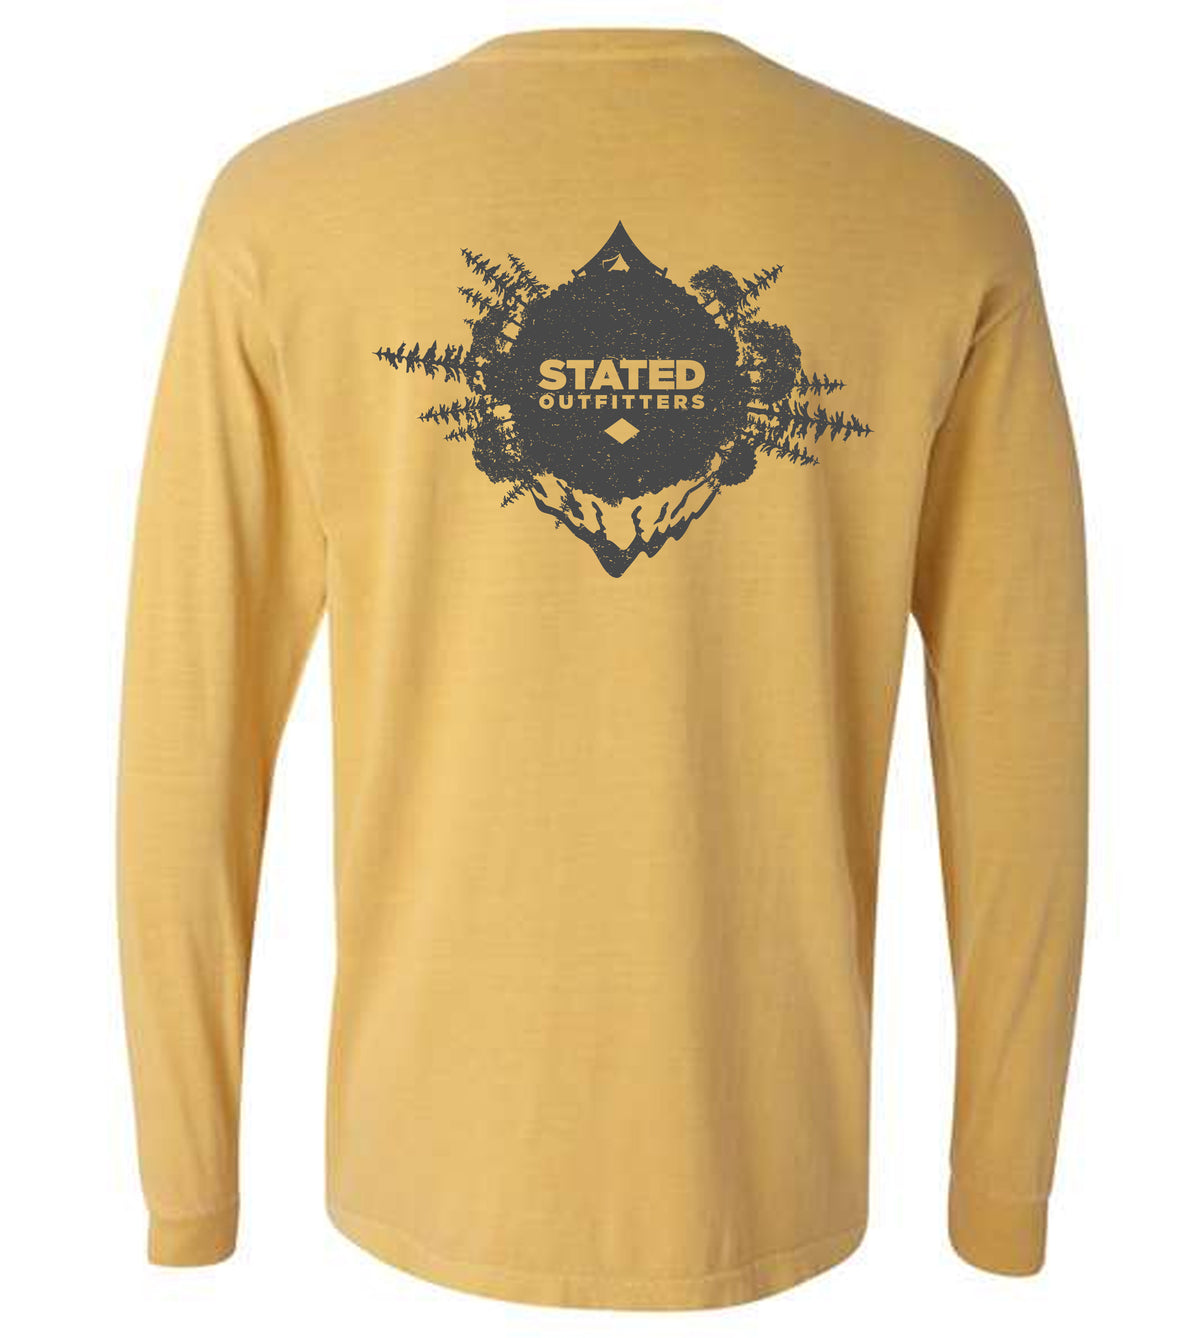 Stated Outfitters Camp the World Long Sleeve